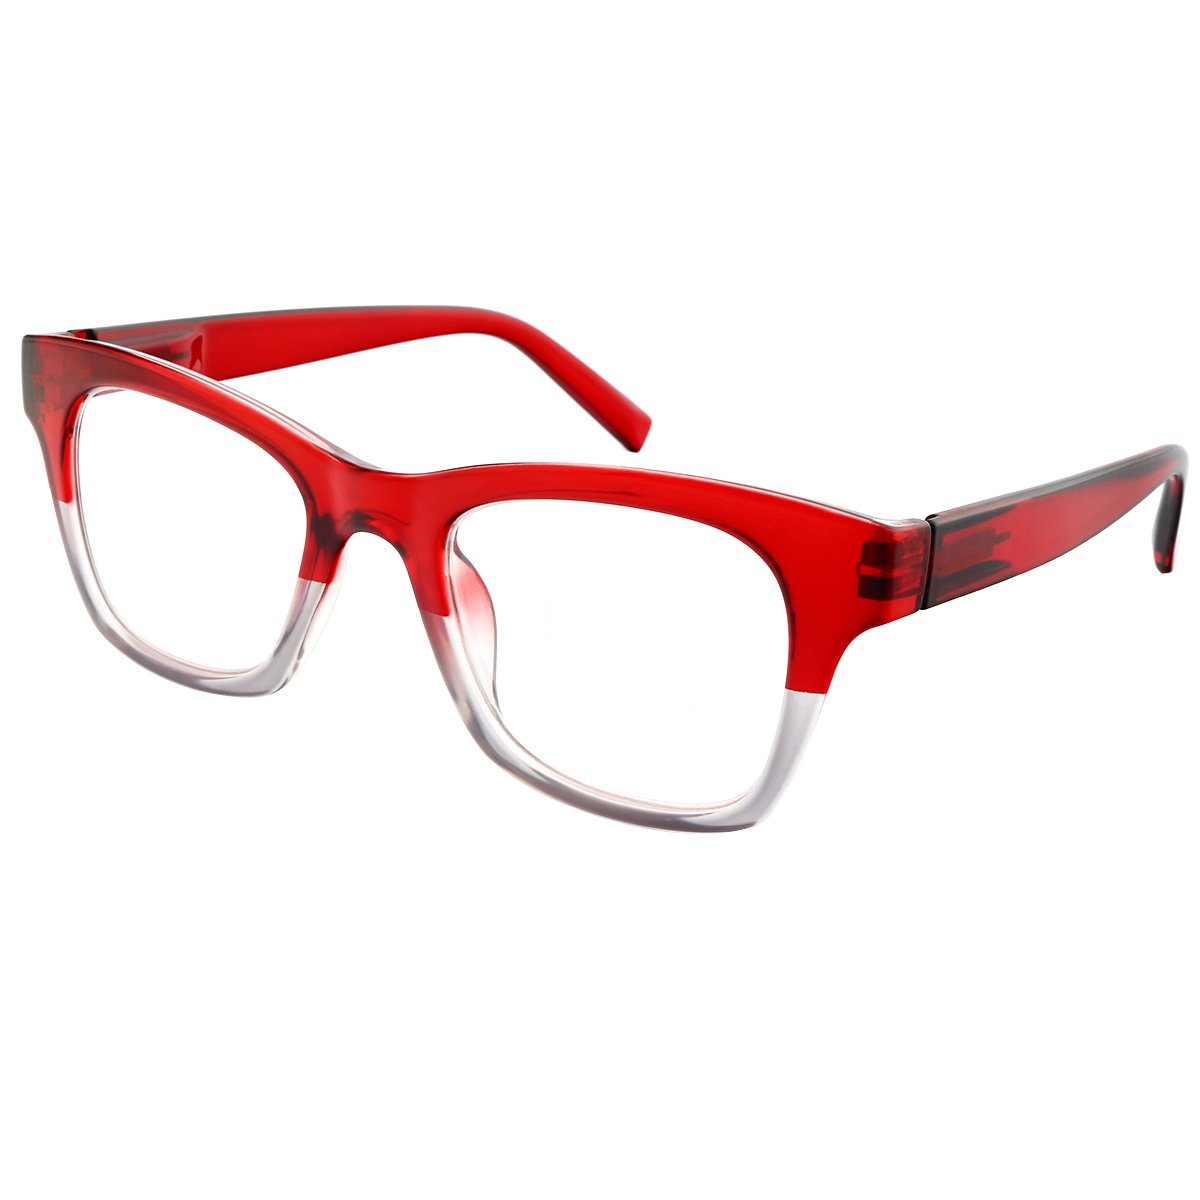 Alesia - Rectangle Red-transparent Reading Glasses for Men & Women